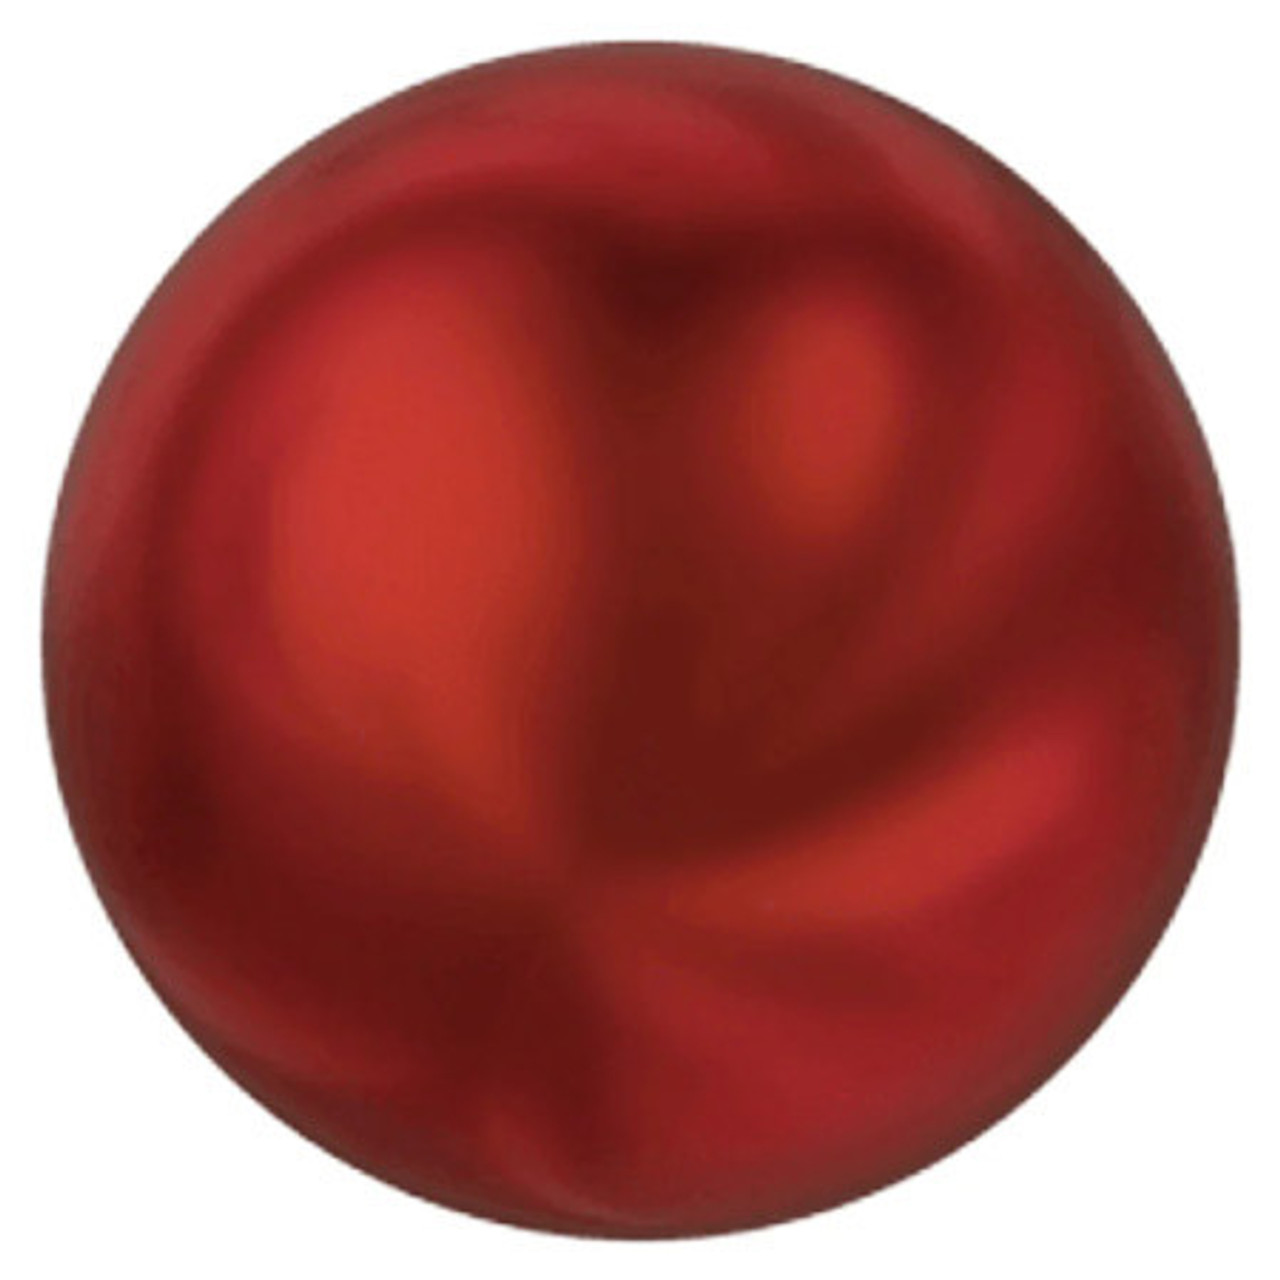 Solid Red Pearl Beads - 3mm - 50 Count